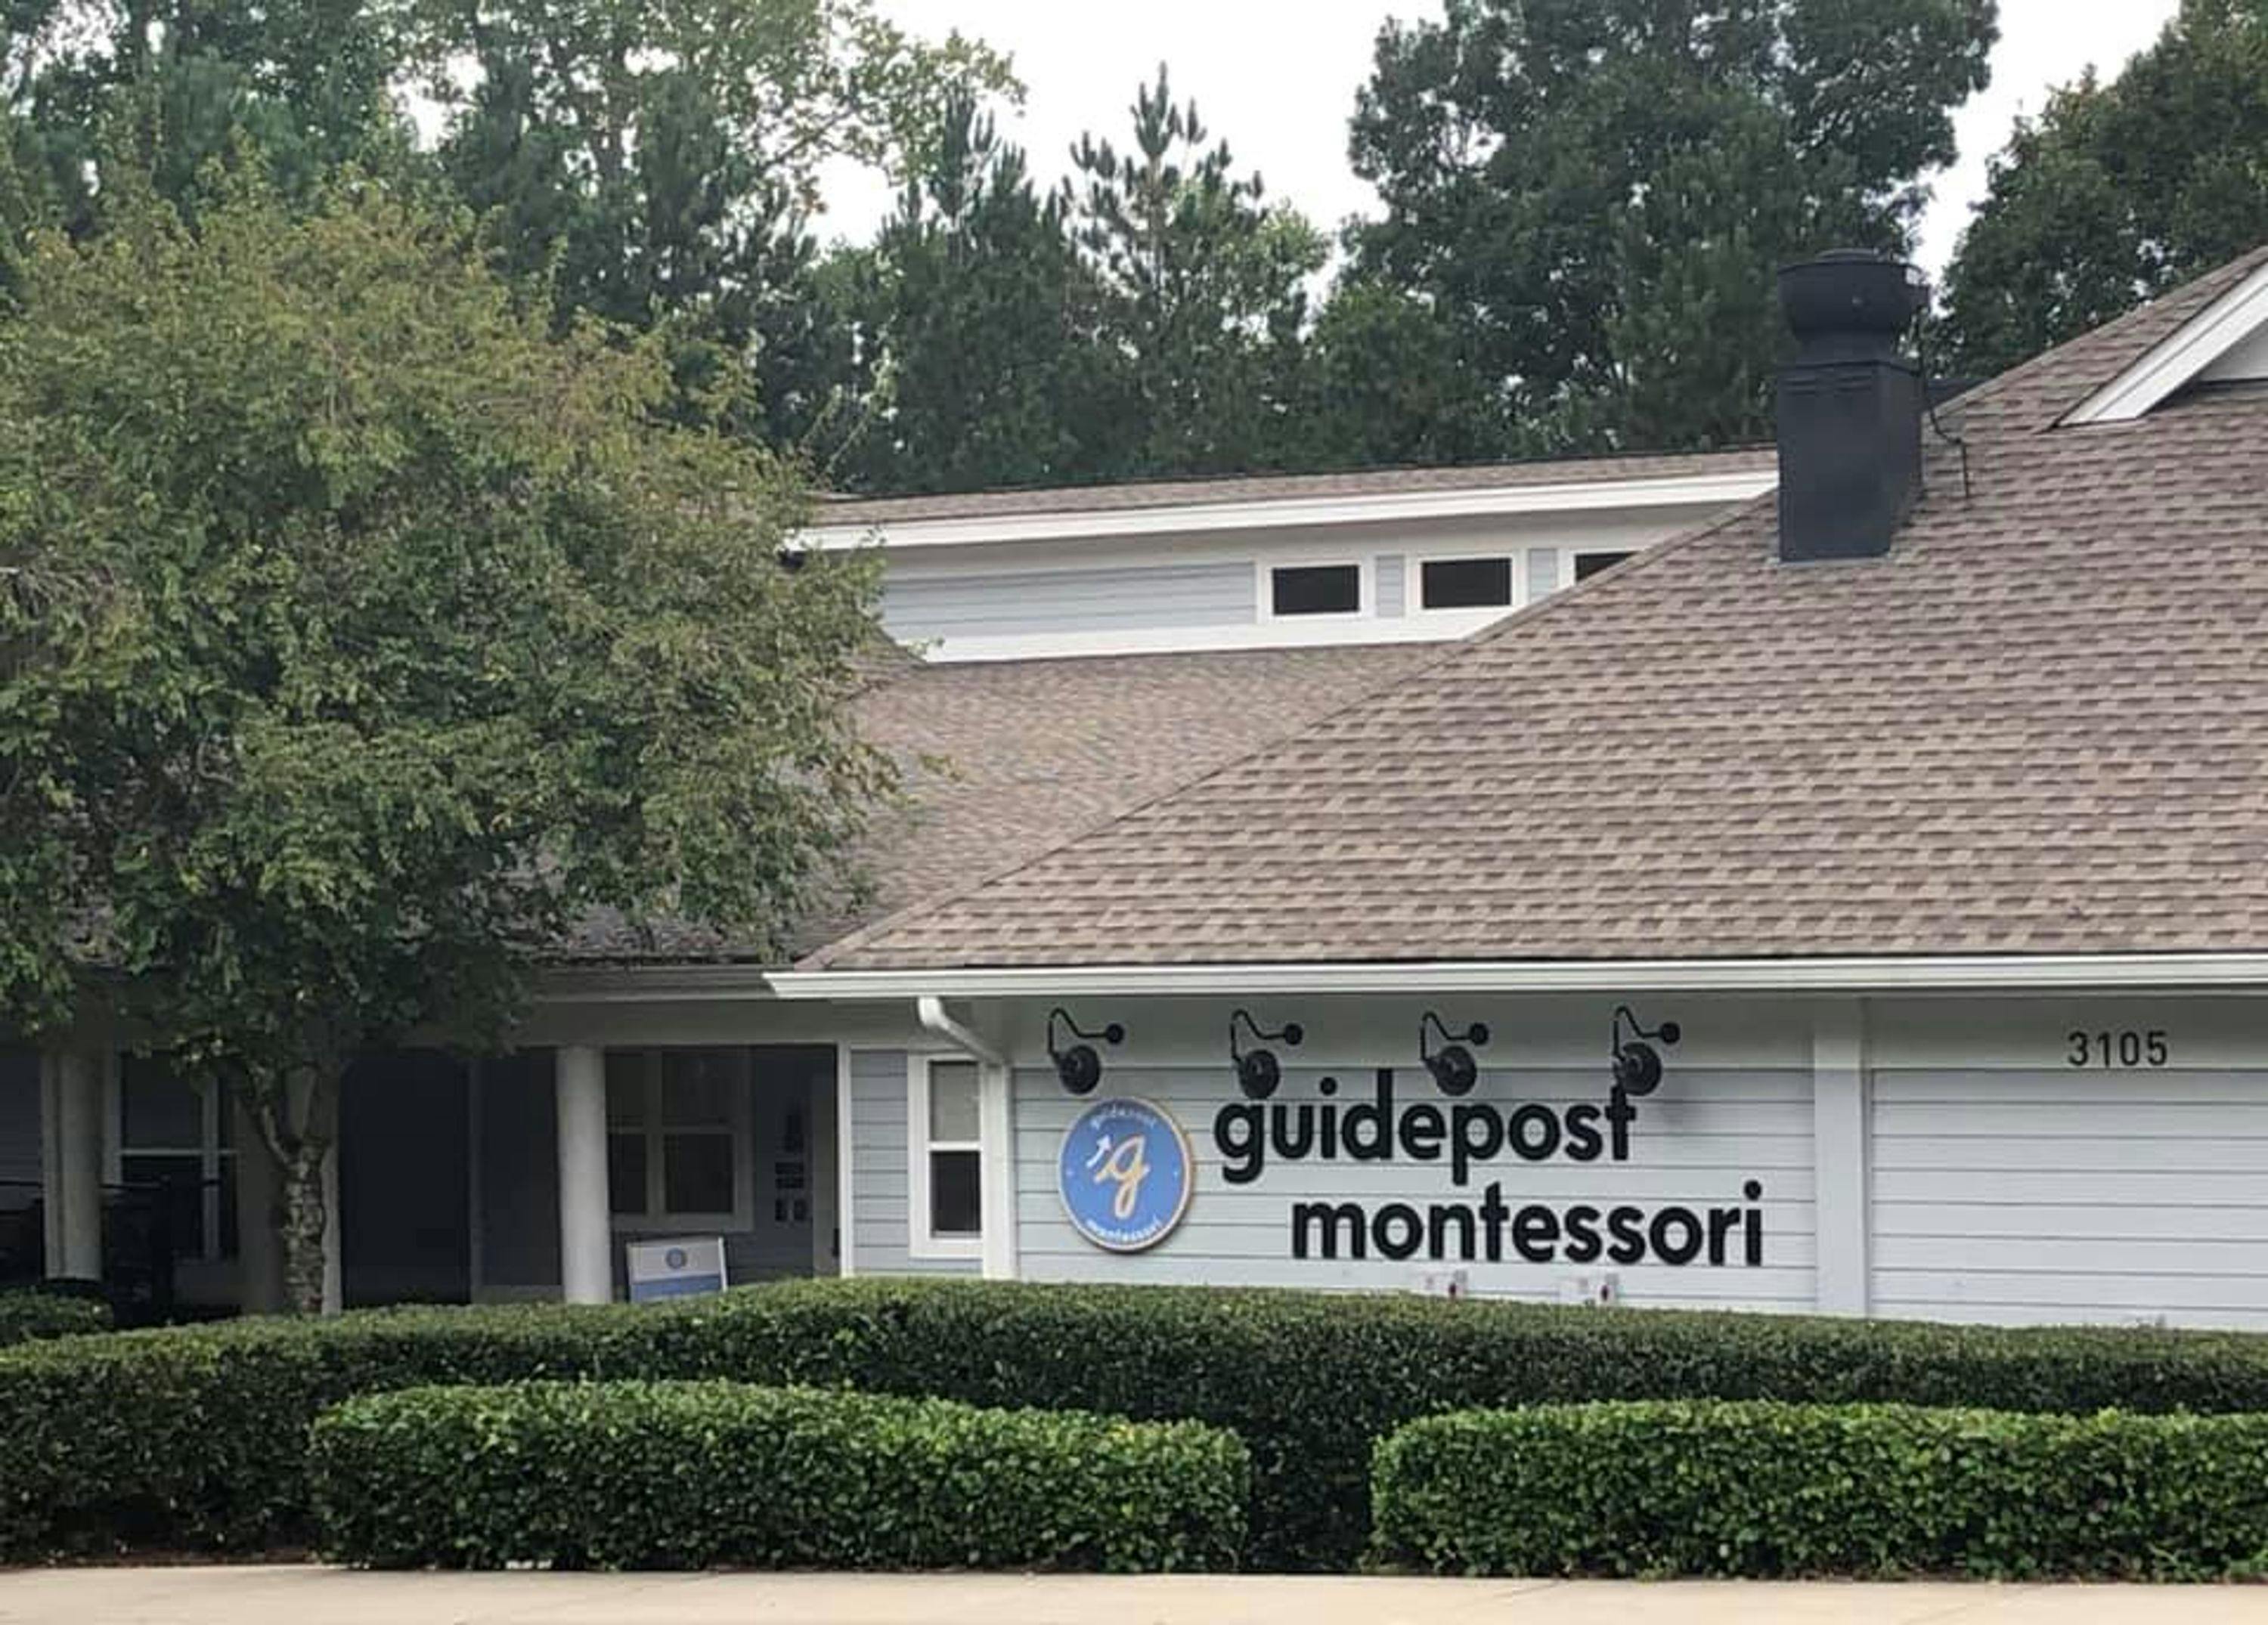 View of Guidepost Montessori at Deerfield through the hedges, showing the closed in walkway shaded by a tree and a branded Guidepost Montessori sign hanging on the right side.